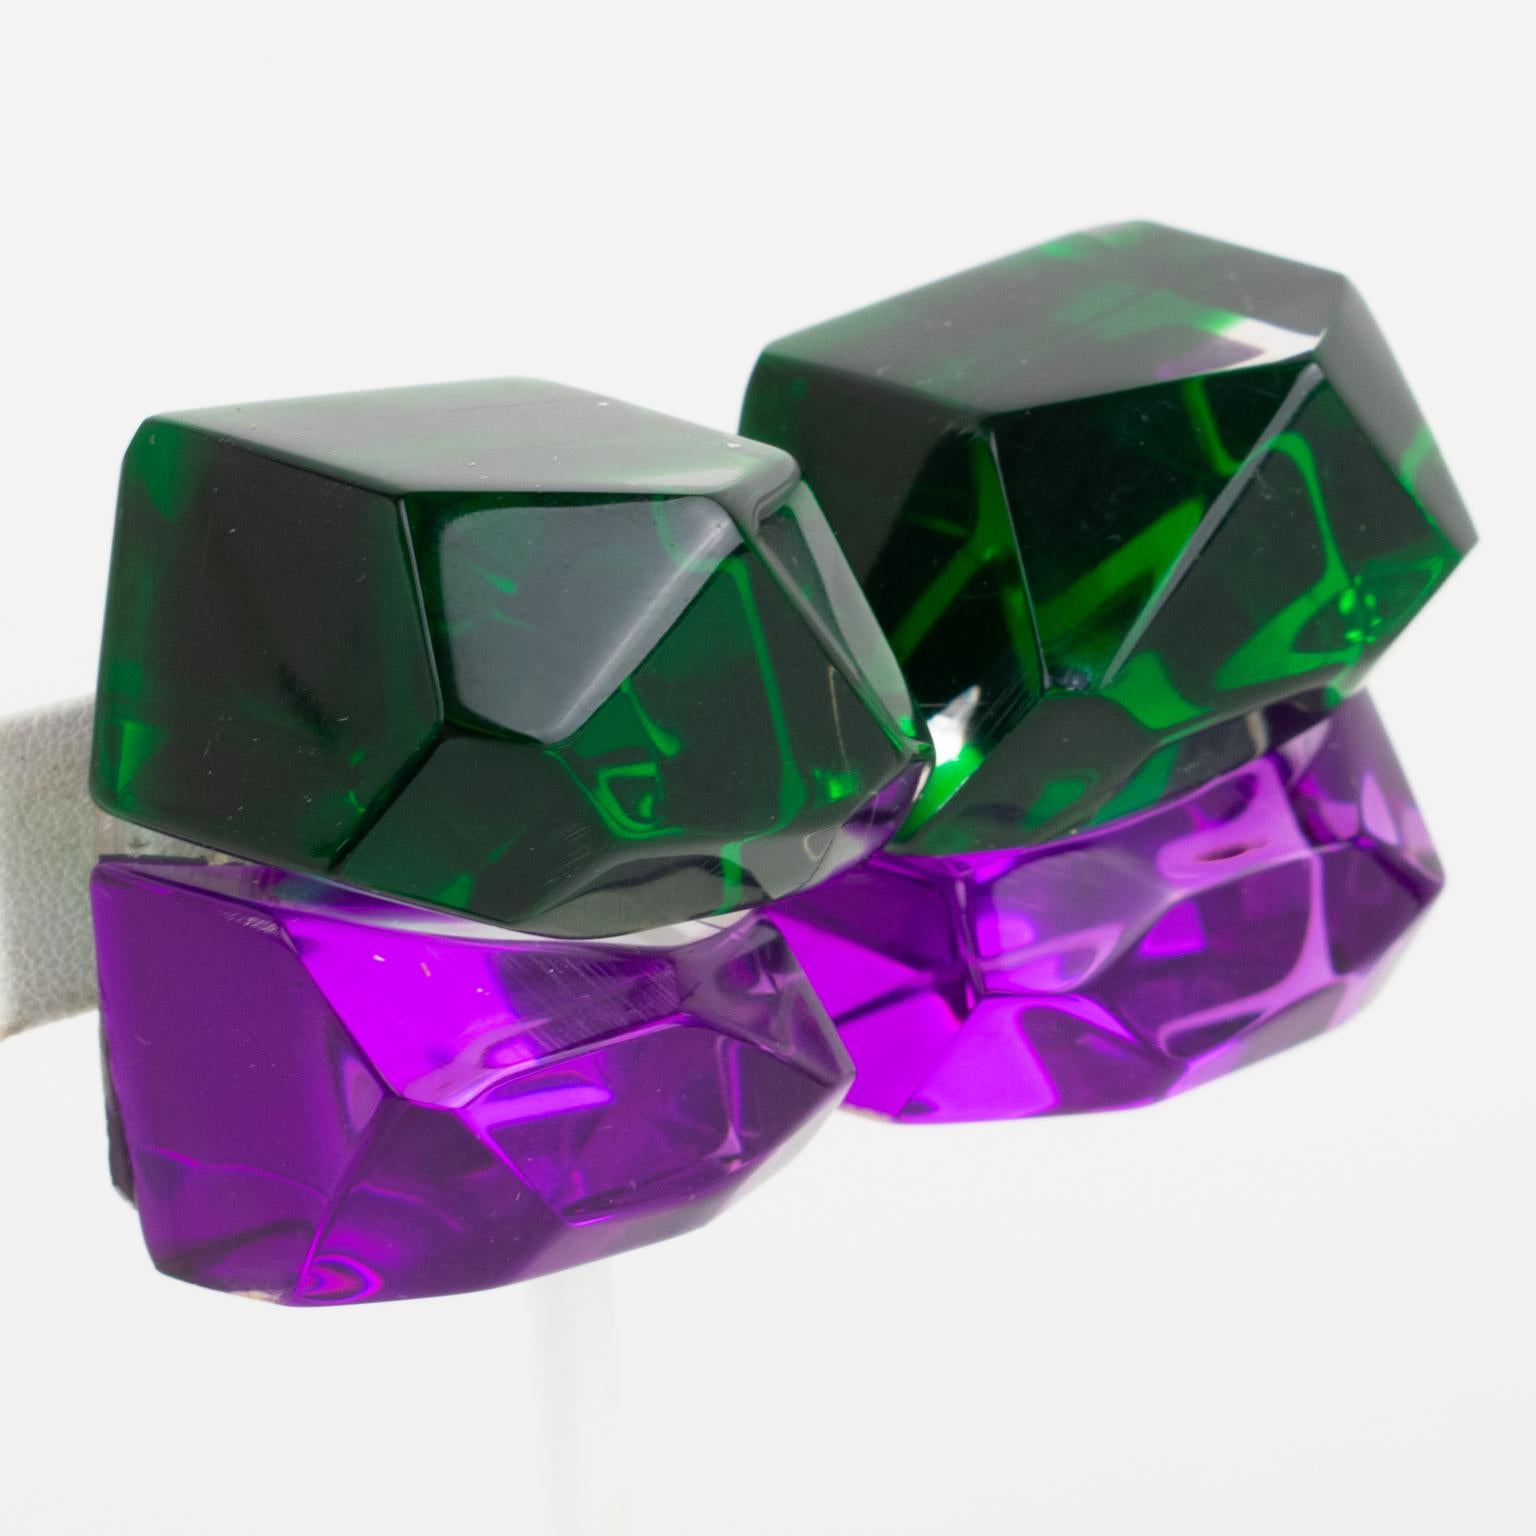 Stunning oversized Lucite clip-on earrings designed by Harriet Bauknight for Kaso. Featuring a huge dimensional double ice cube with amethyst purple and emerald green mirror textured pattern and asymmetric beveled edges all around. 
Kaso paper